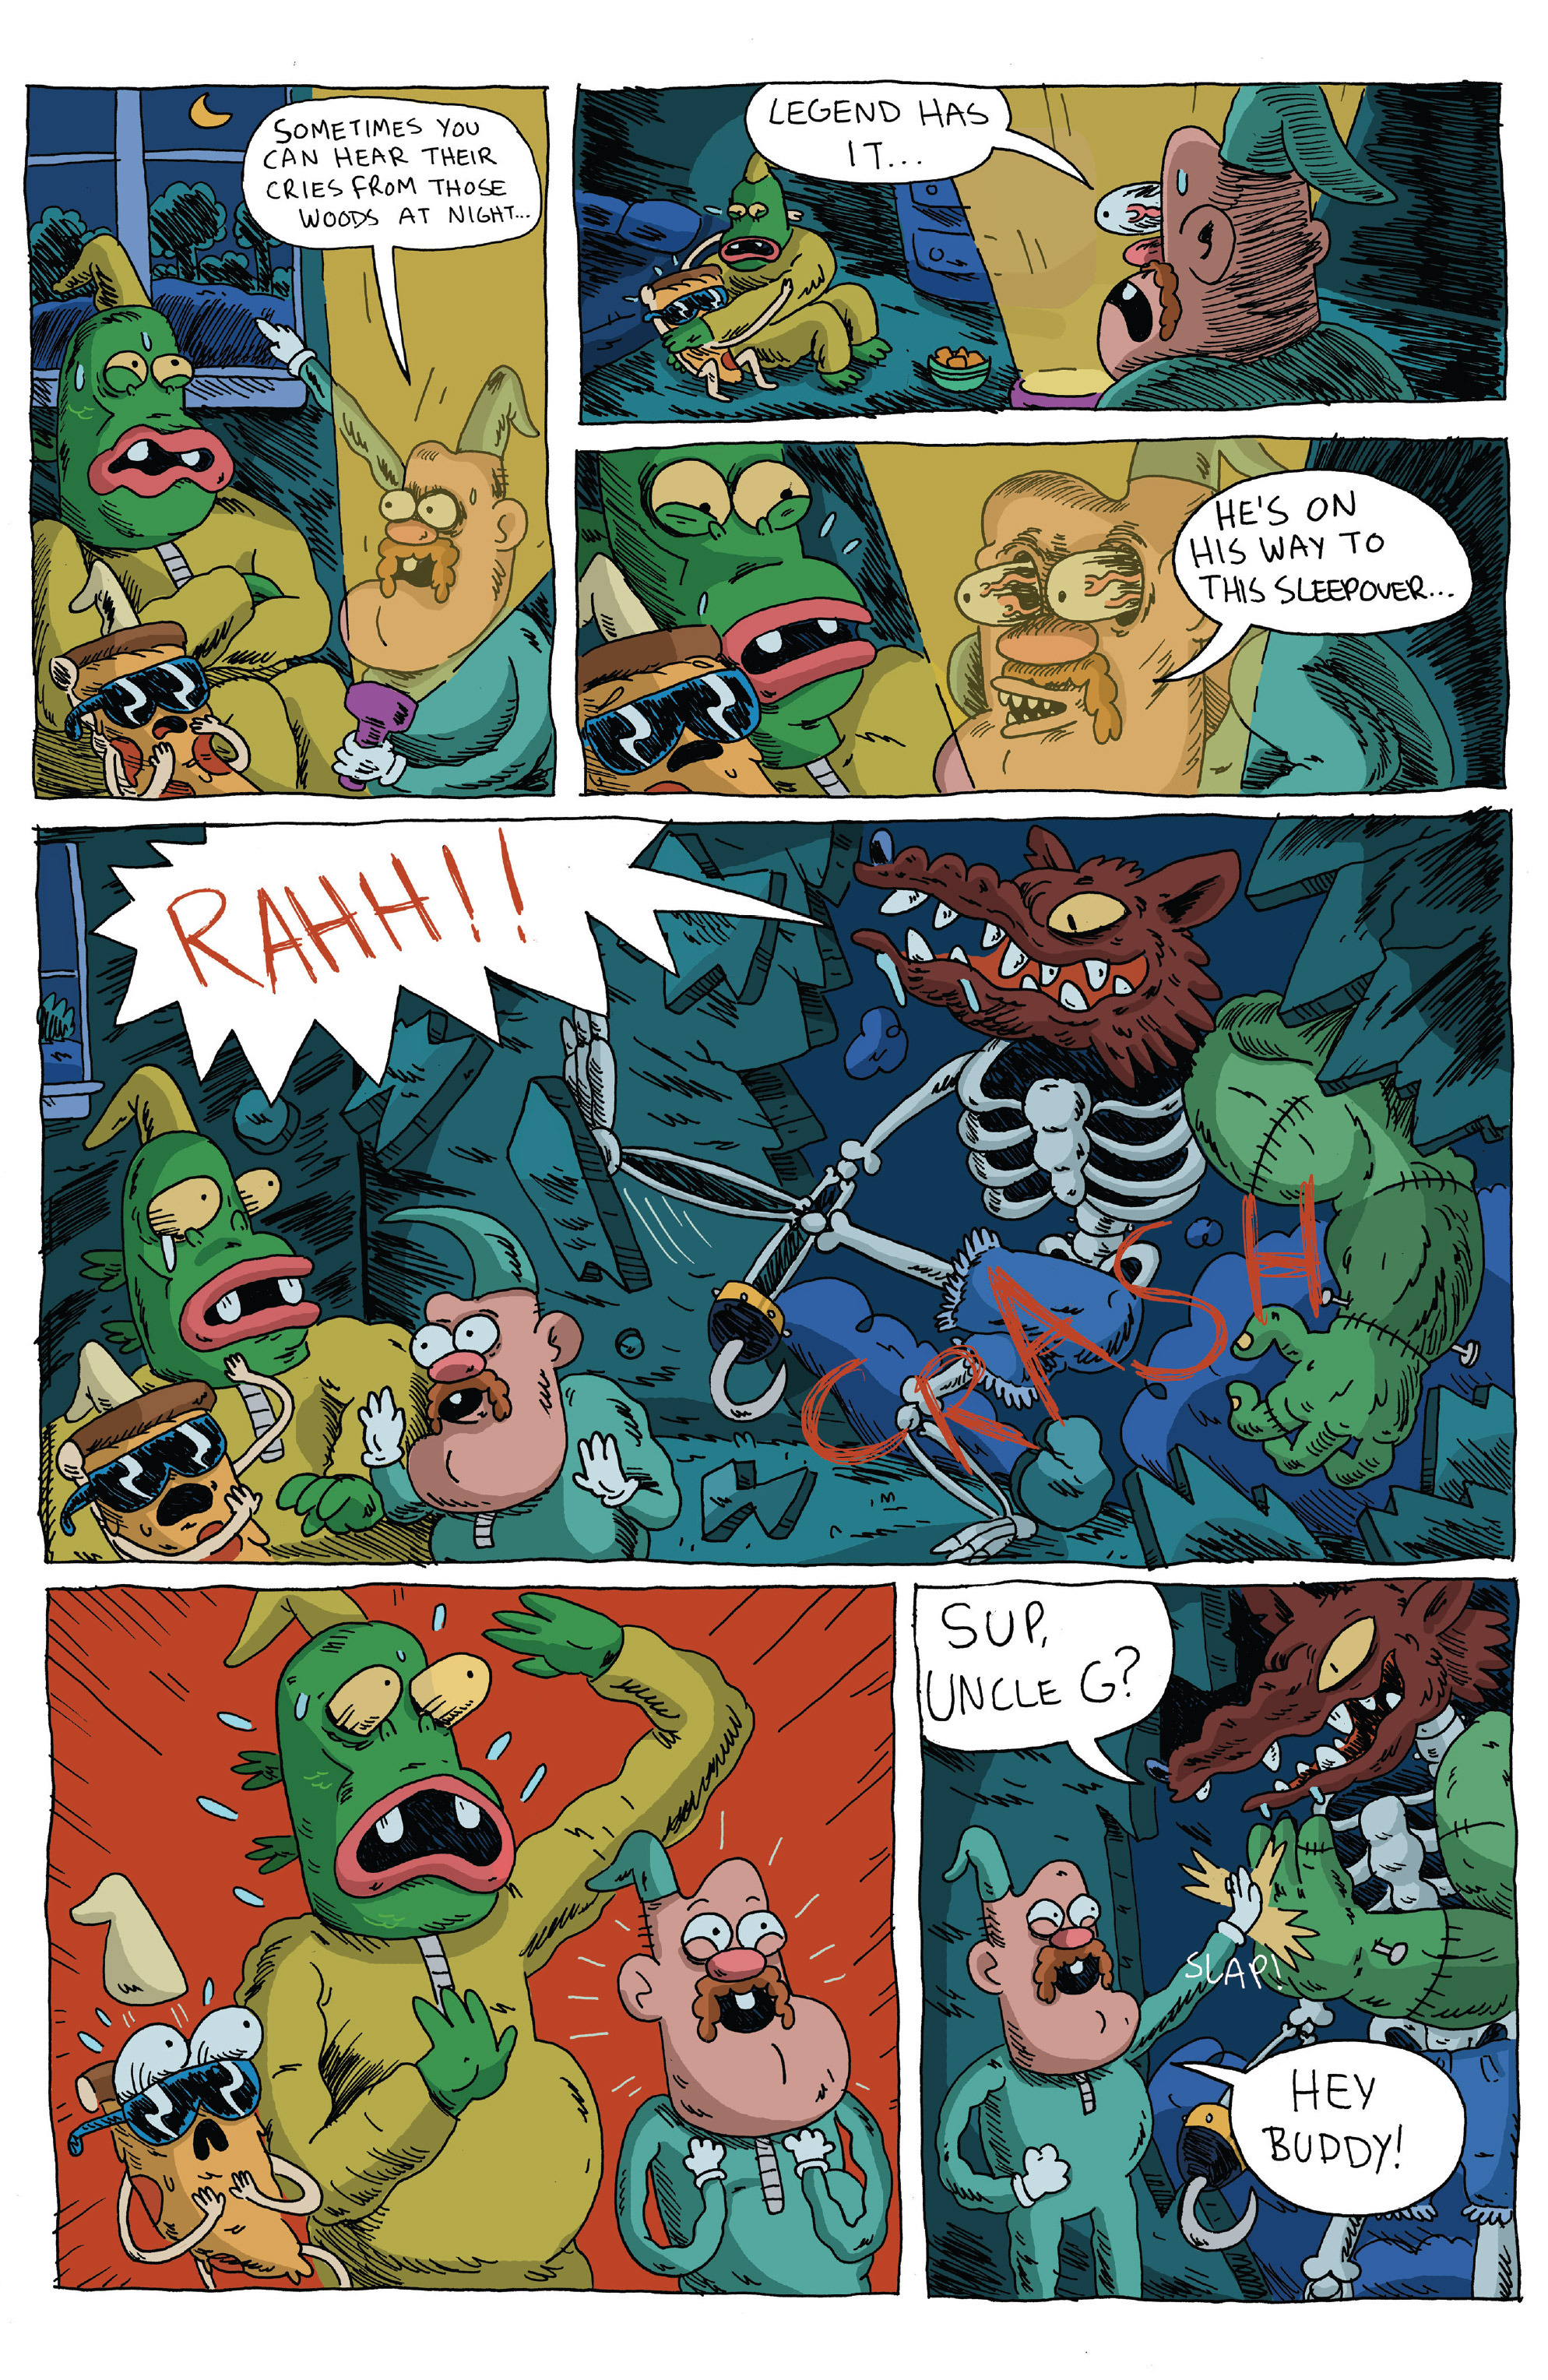 Uncle Grandpa 1 | Read Uncle Grandpa 1 comic online in high quality. Read  Full Comic online for free - Read comics online in high quality .| READ  COMIC ONLINE